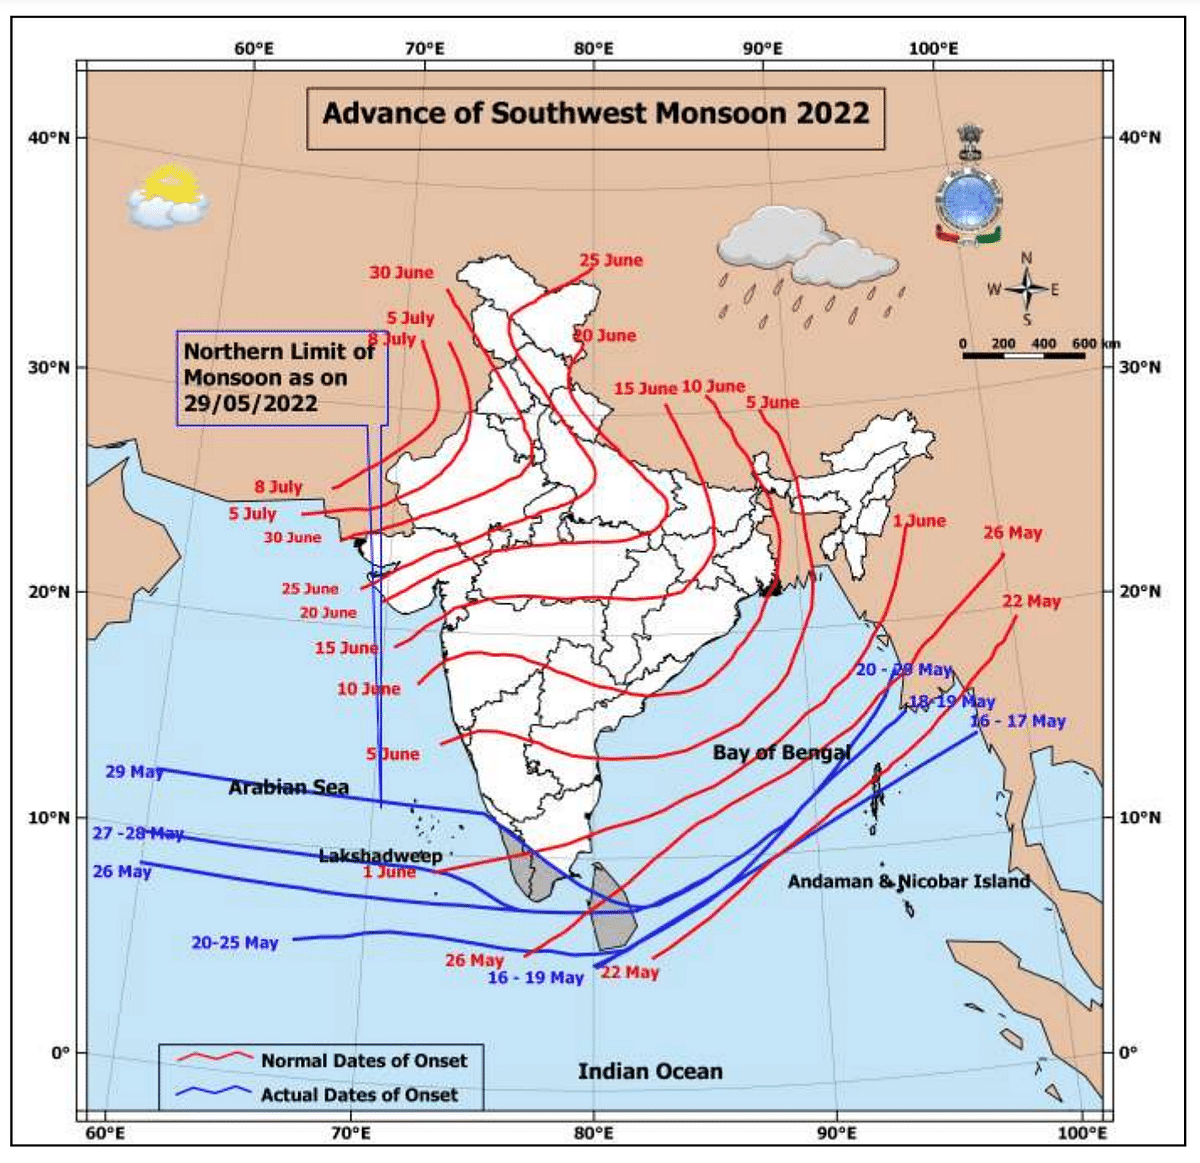 India may be staring at a delayed and dry southwestern monsoon in the first two months with a lot of heatwaves.